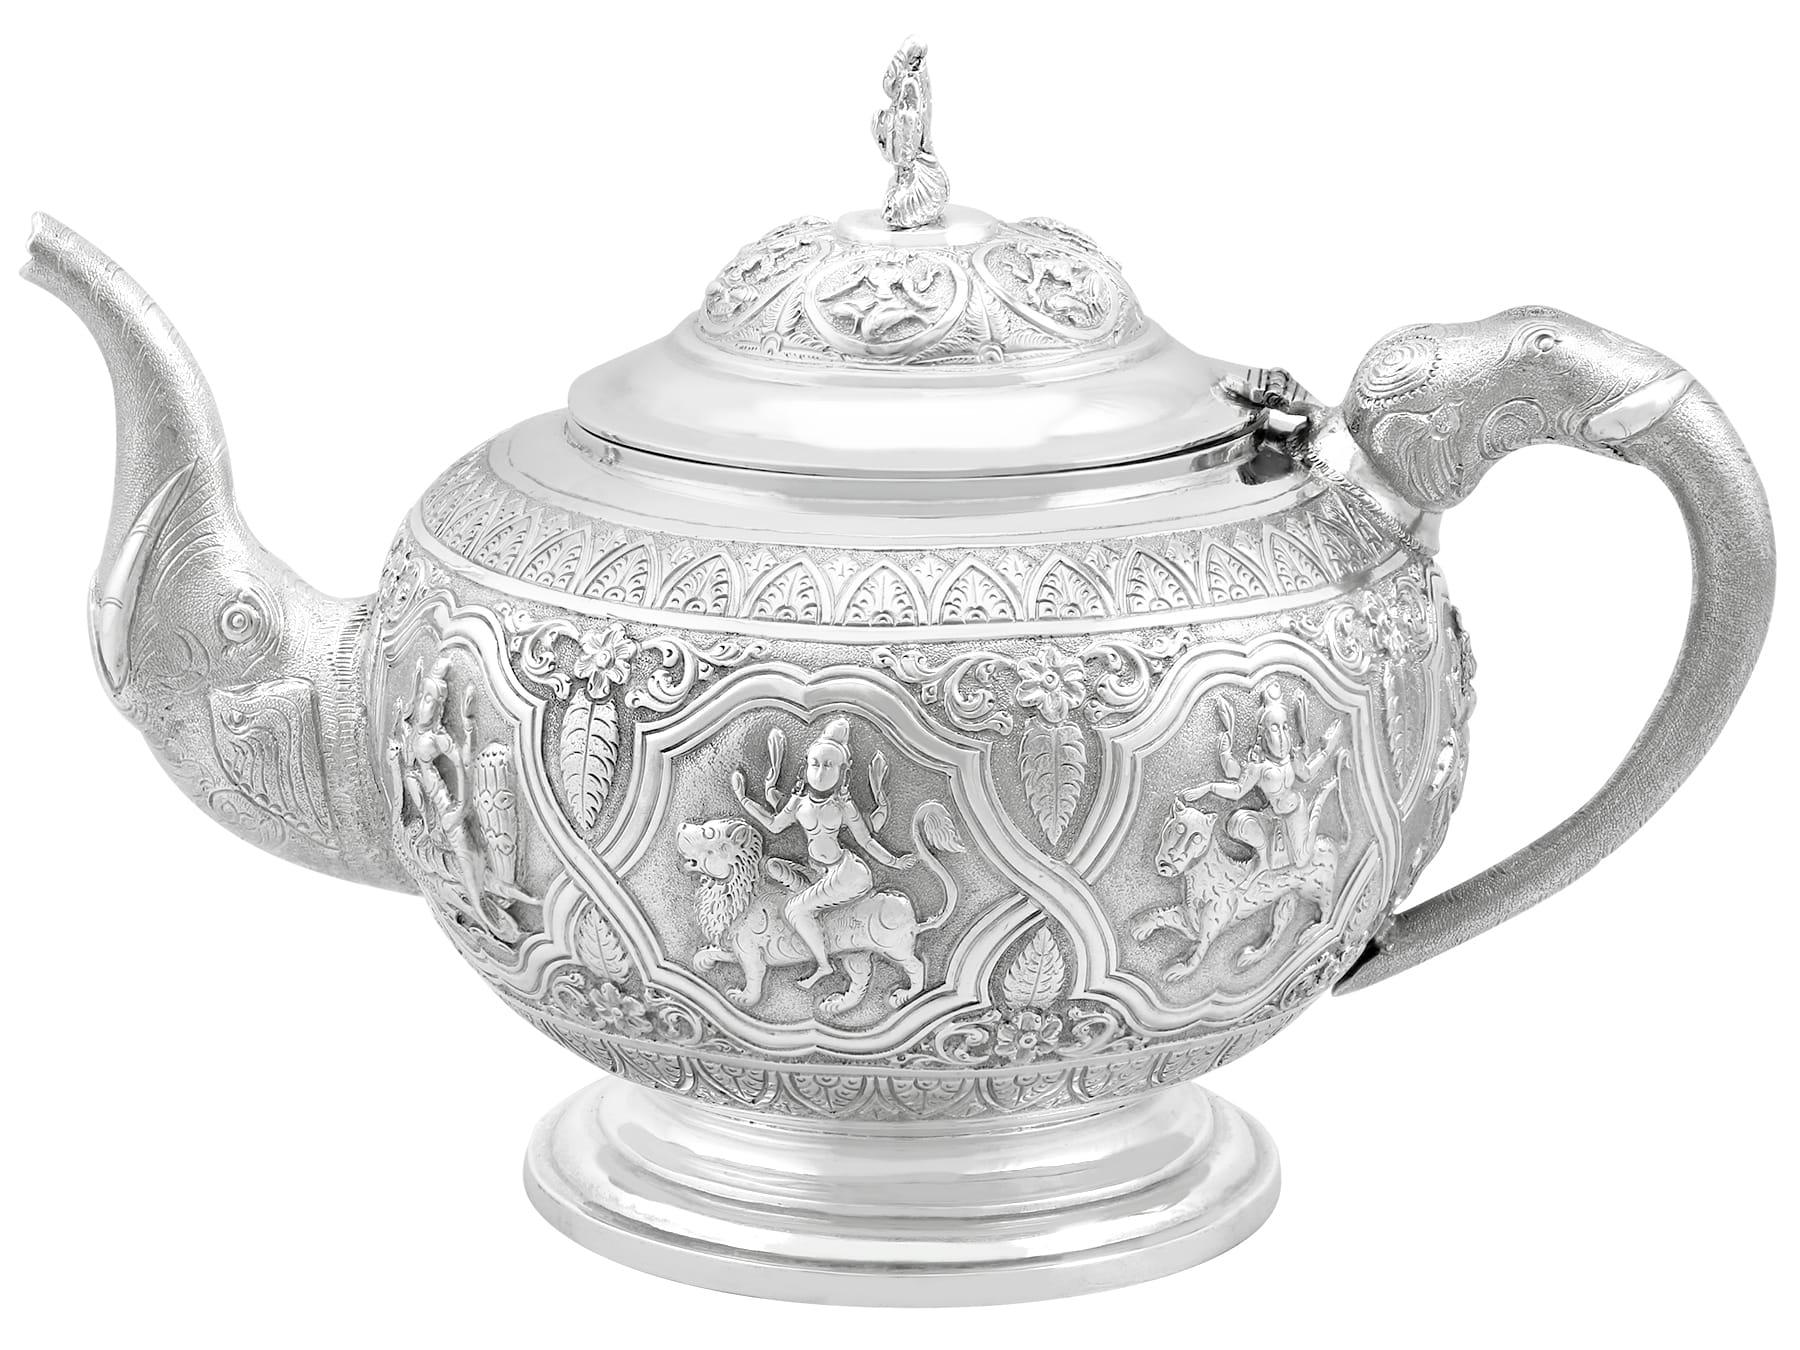 Antique Indian Silver Teapot In Excellent Condition For Sale In Jesmond, Newcastle Upon Tyne